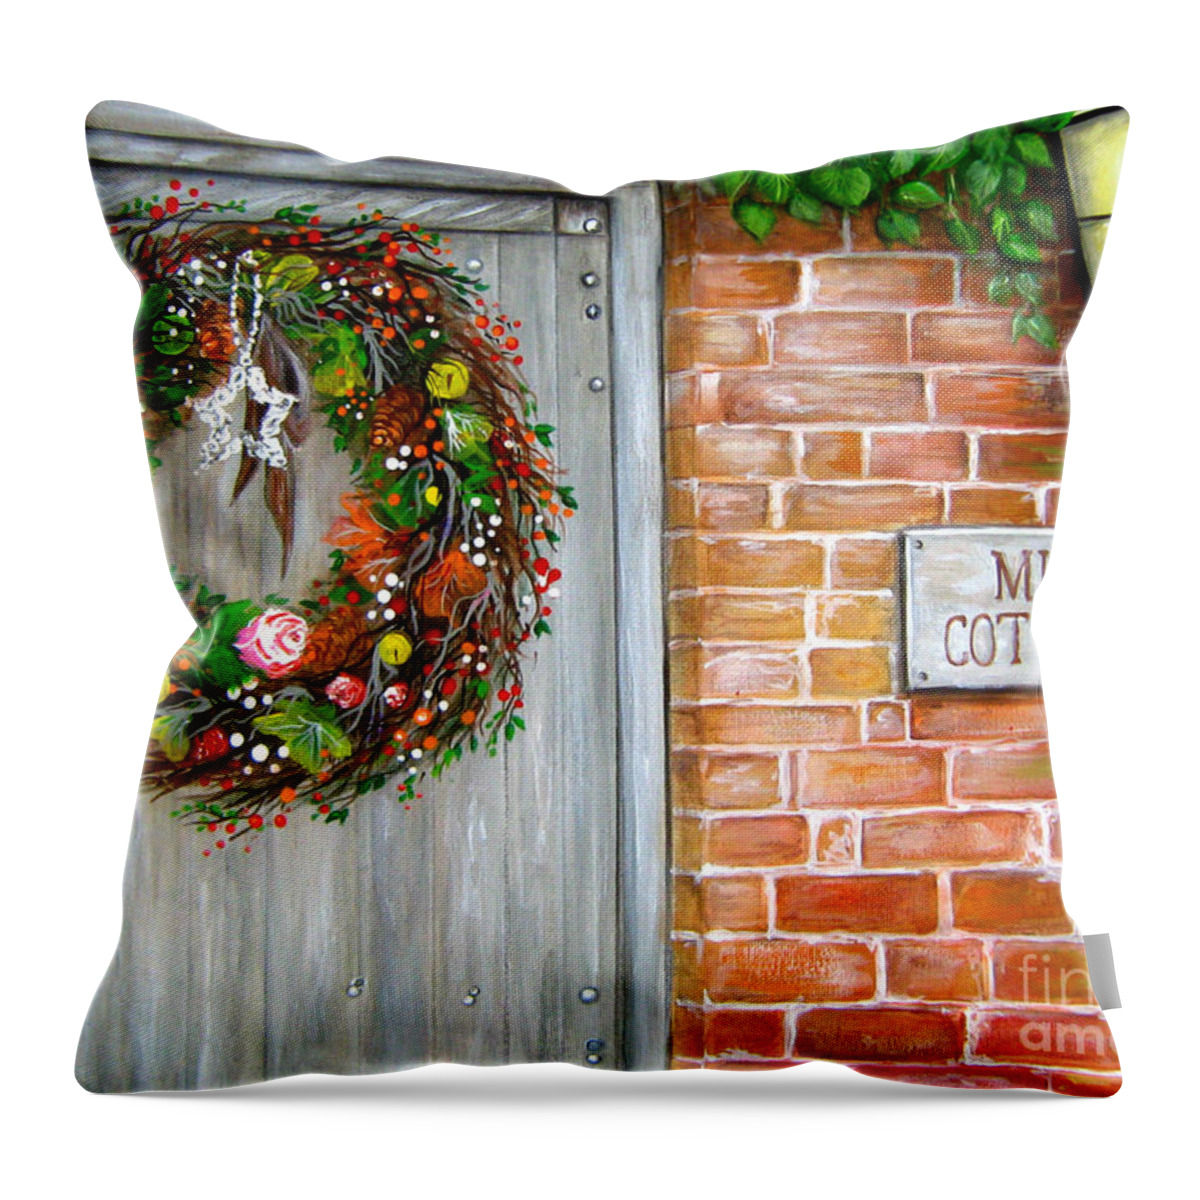 Mill Throw Pillow featuring the painting George Michaels Mill Cottage by Bella Apollonia